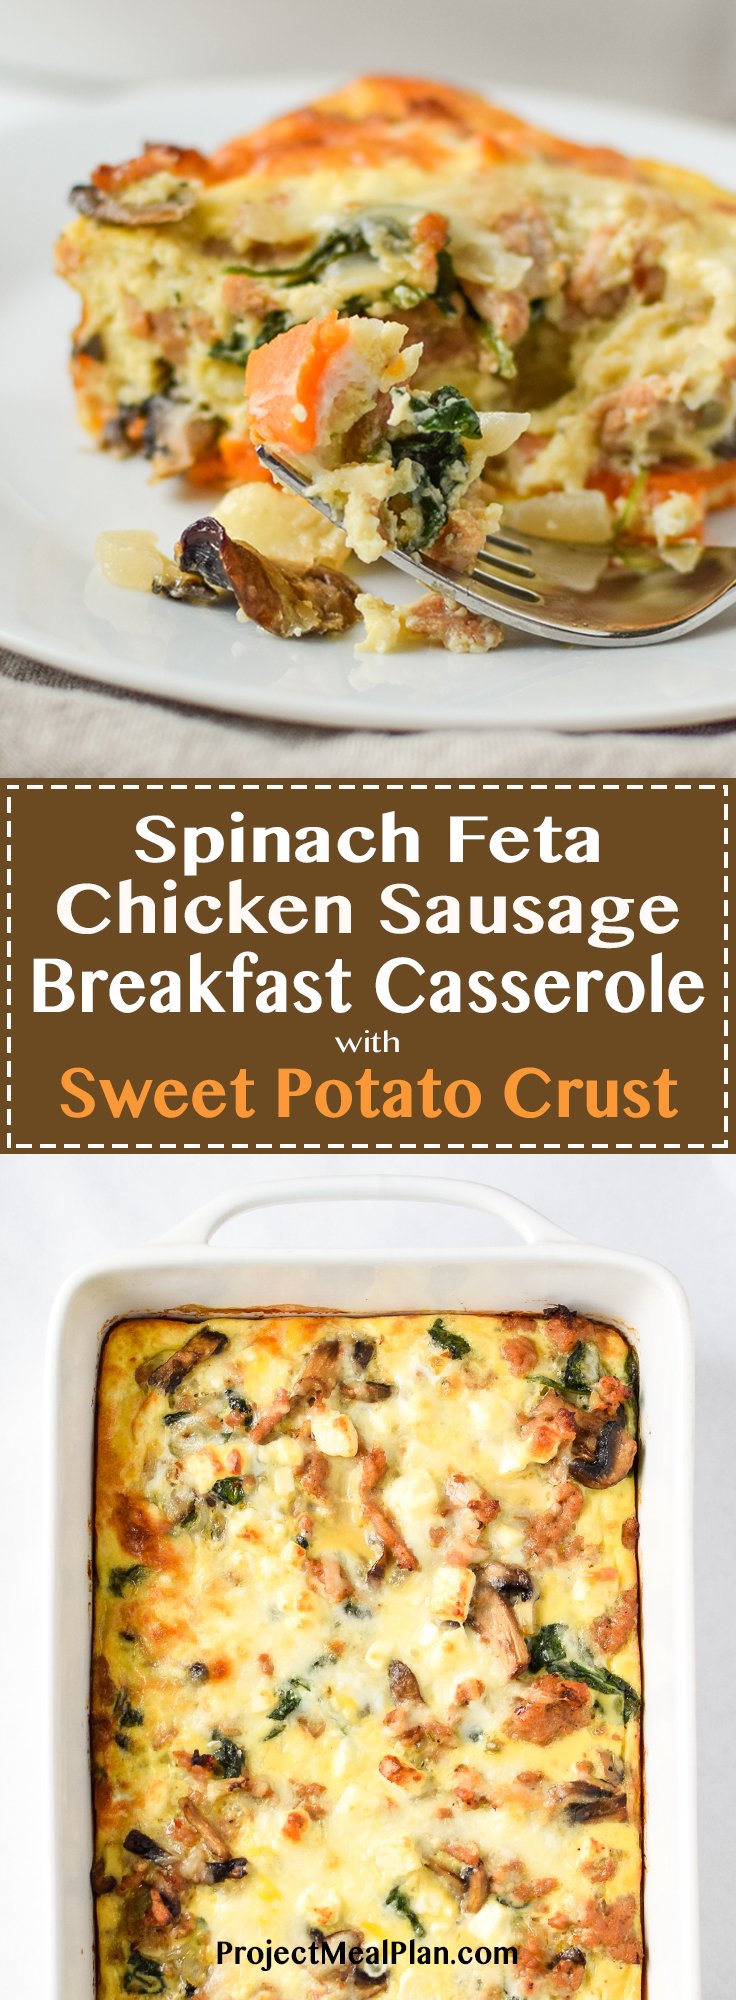 Spinach Feta Chicken Sausage Breakfast Casserole with Sweet Potato Crust - A tasty breakfast favorite for a crowd (or meal prepped!) with an easy sweet potato crust! - ProjectMealPlan.com